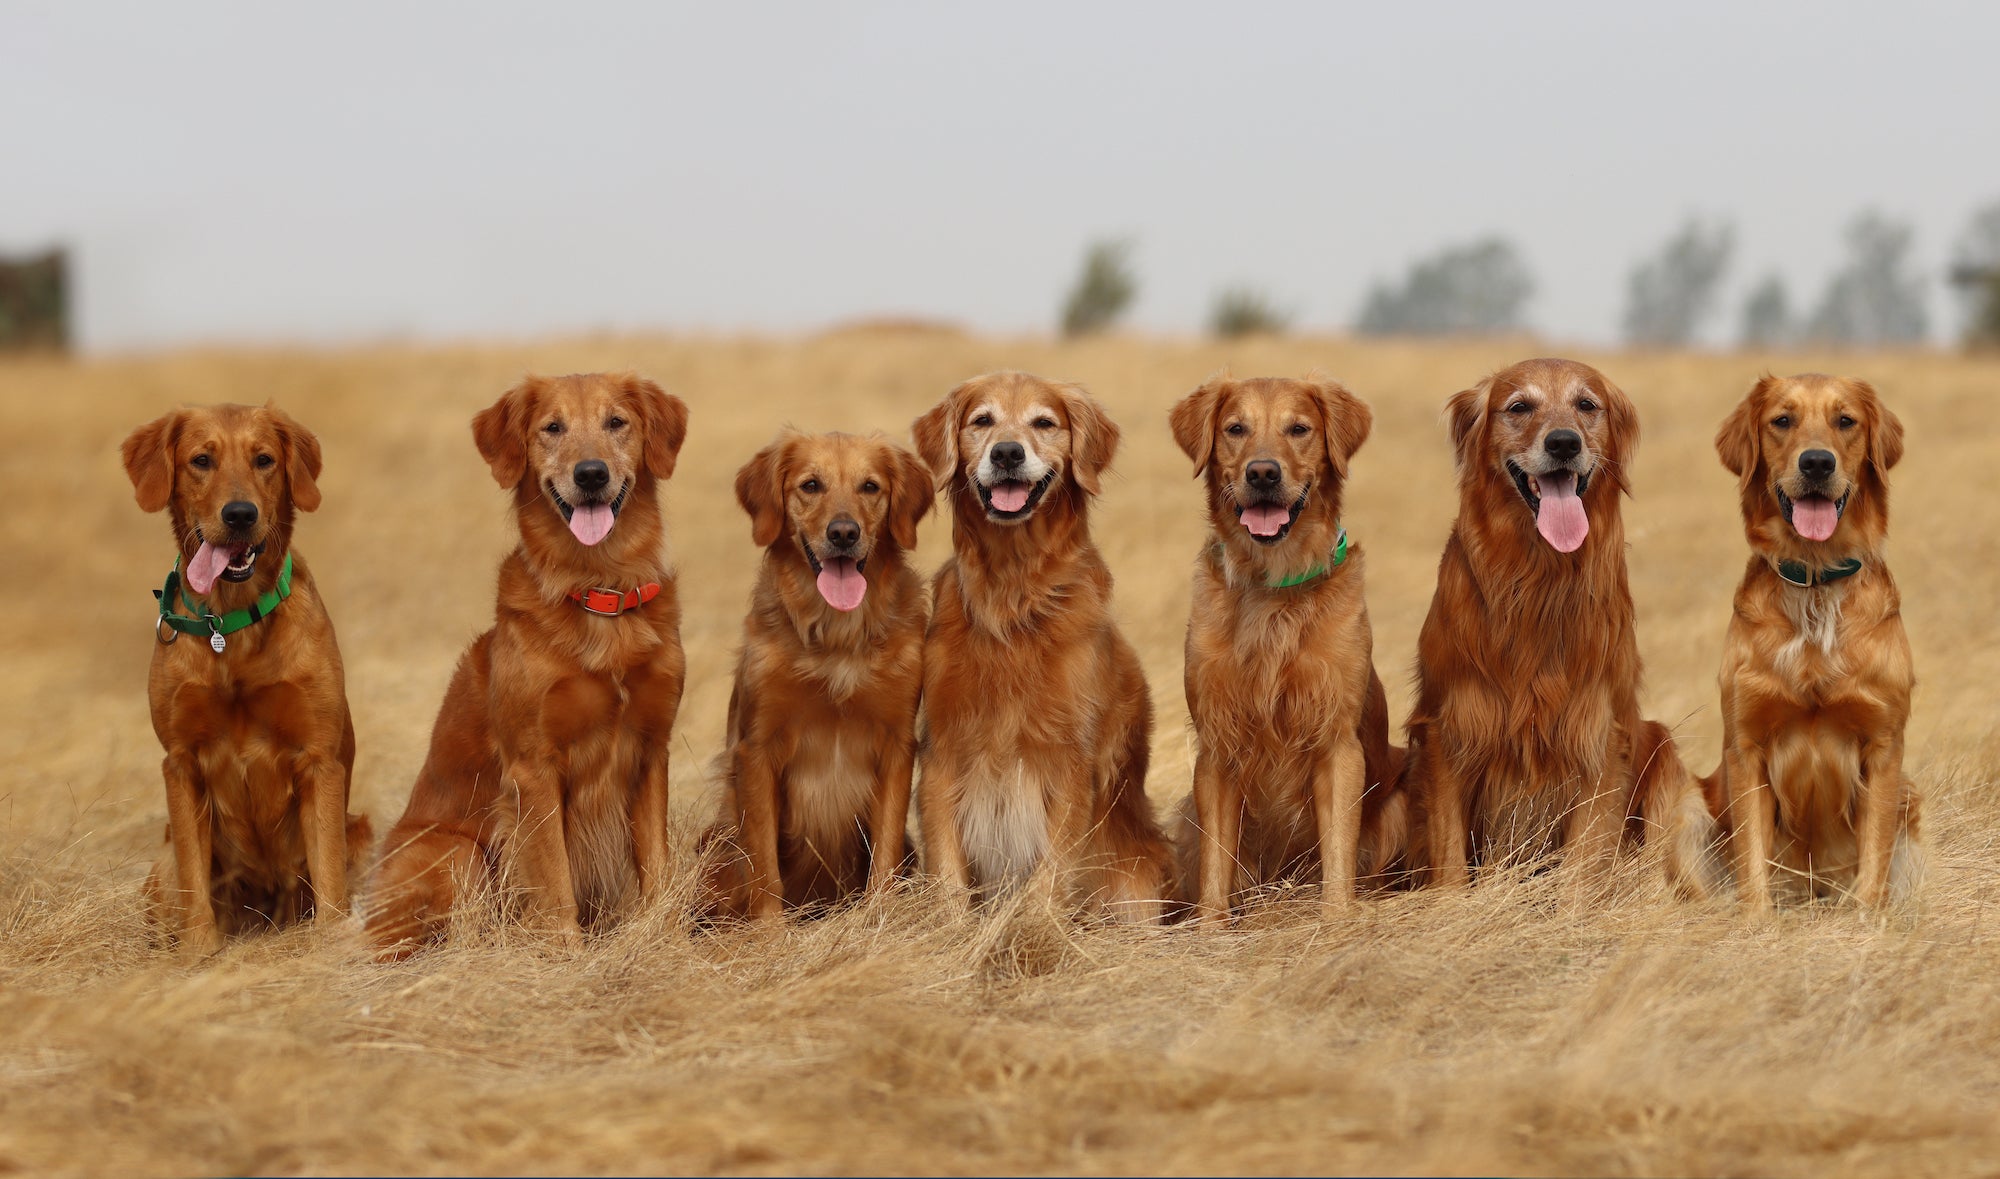 UC Davis researchers have found a gene associated with longevity in Golden Retrievers, one of the most popular breeds of dogs. (Jessica Hecock)